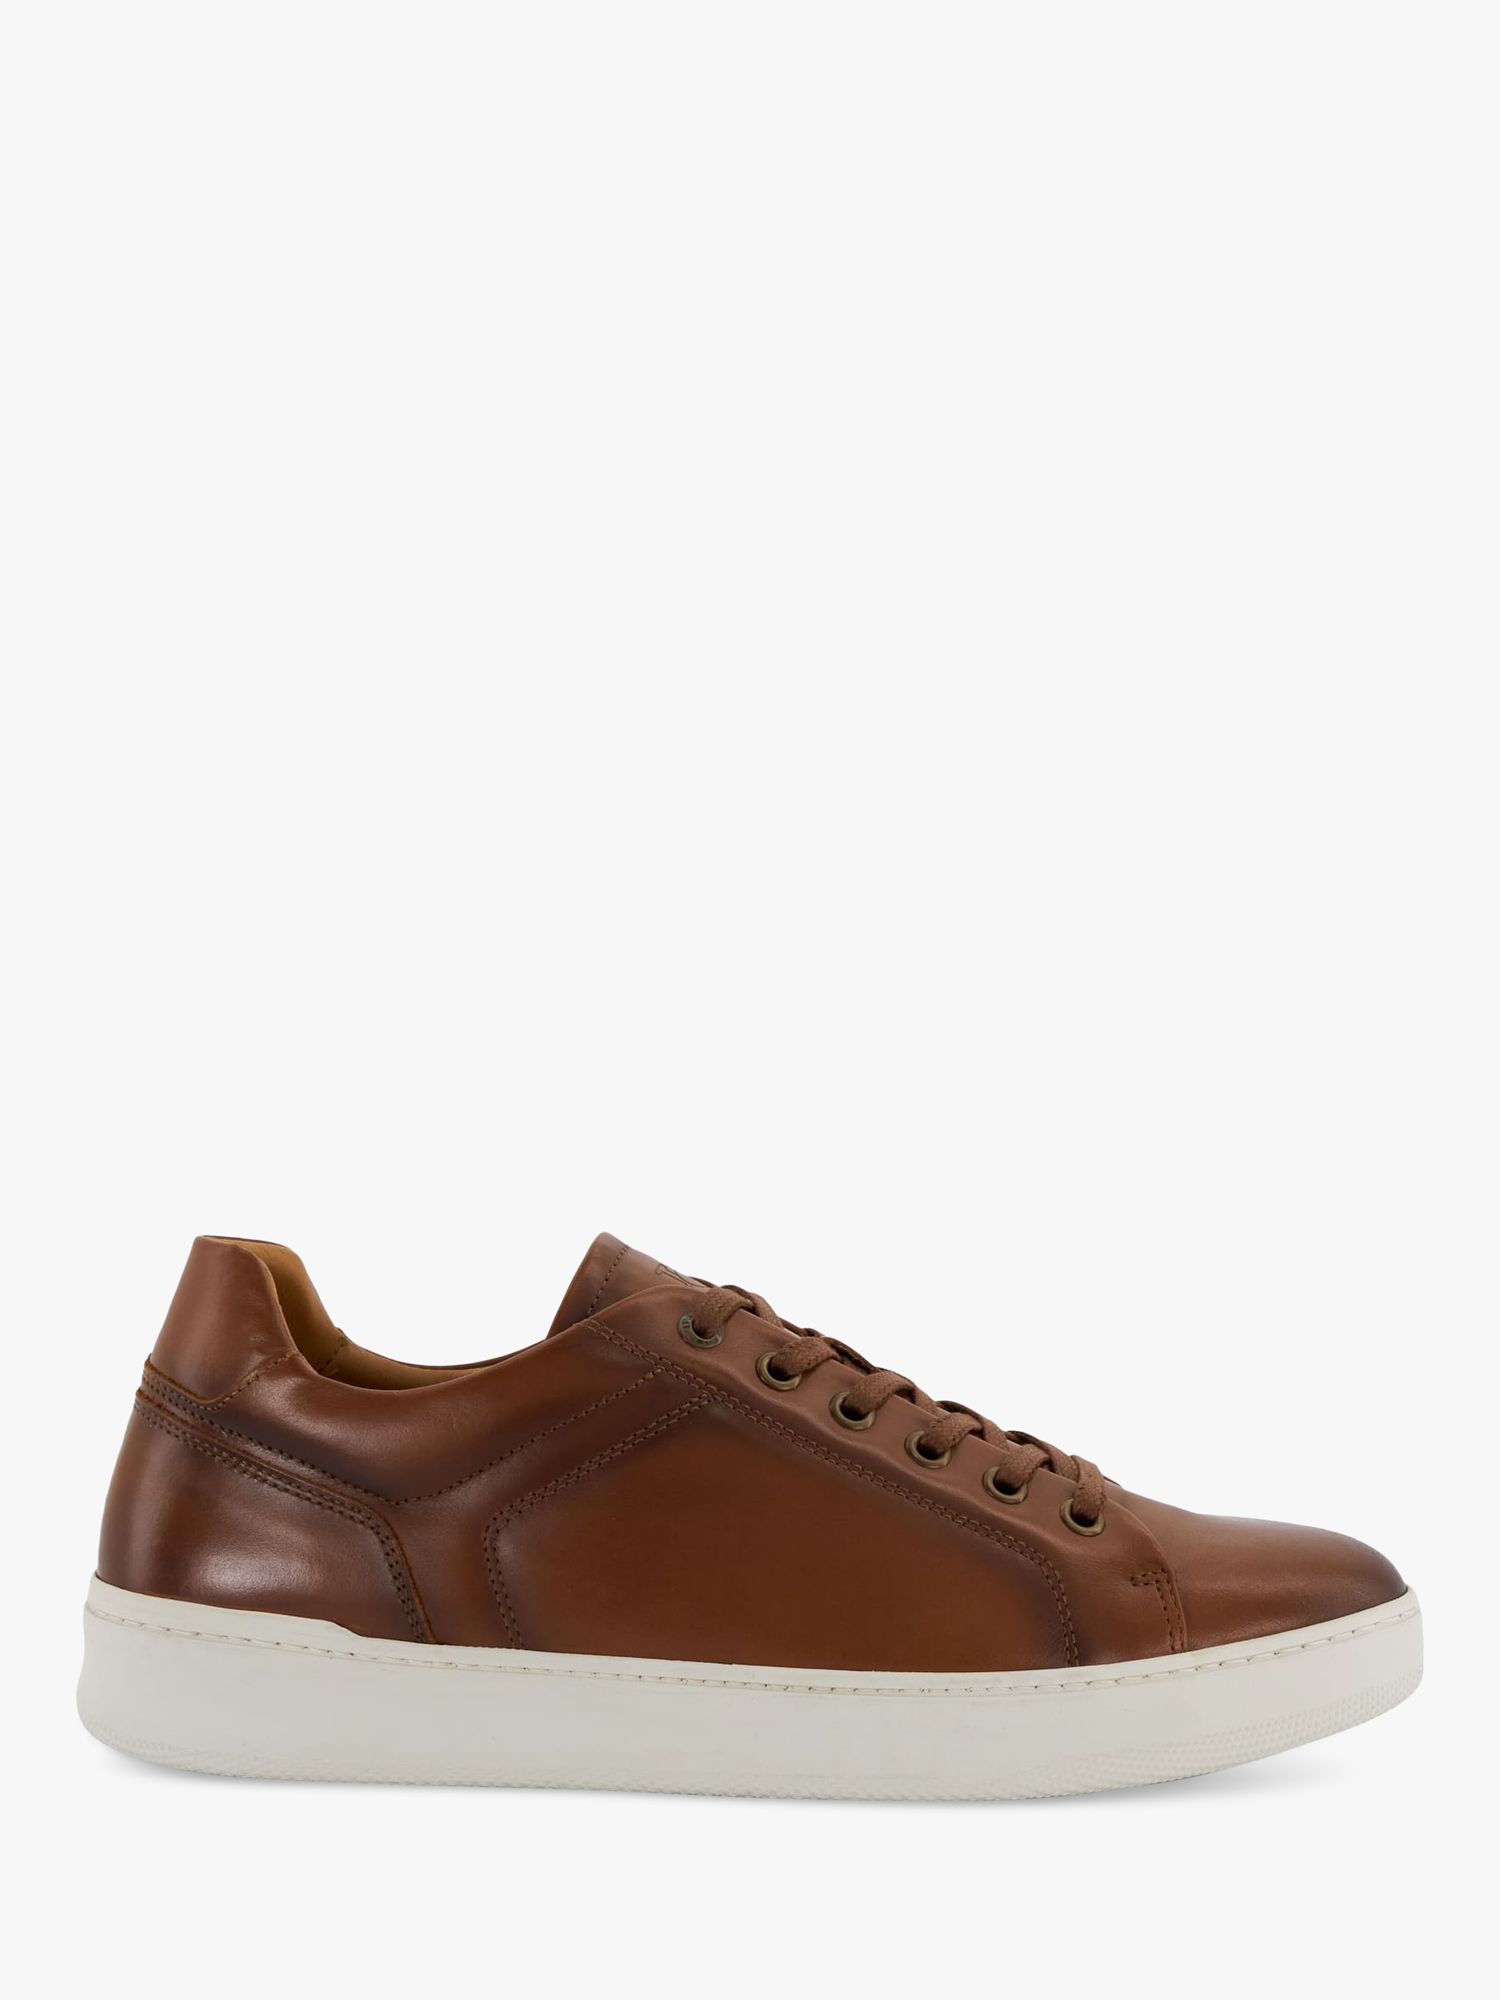 Dune Toledo Low Top Leather Trainers, Tan at John Lewis & Partners